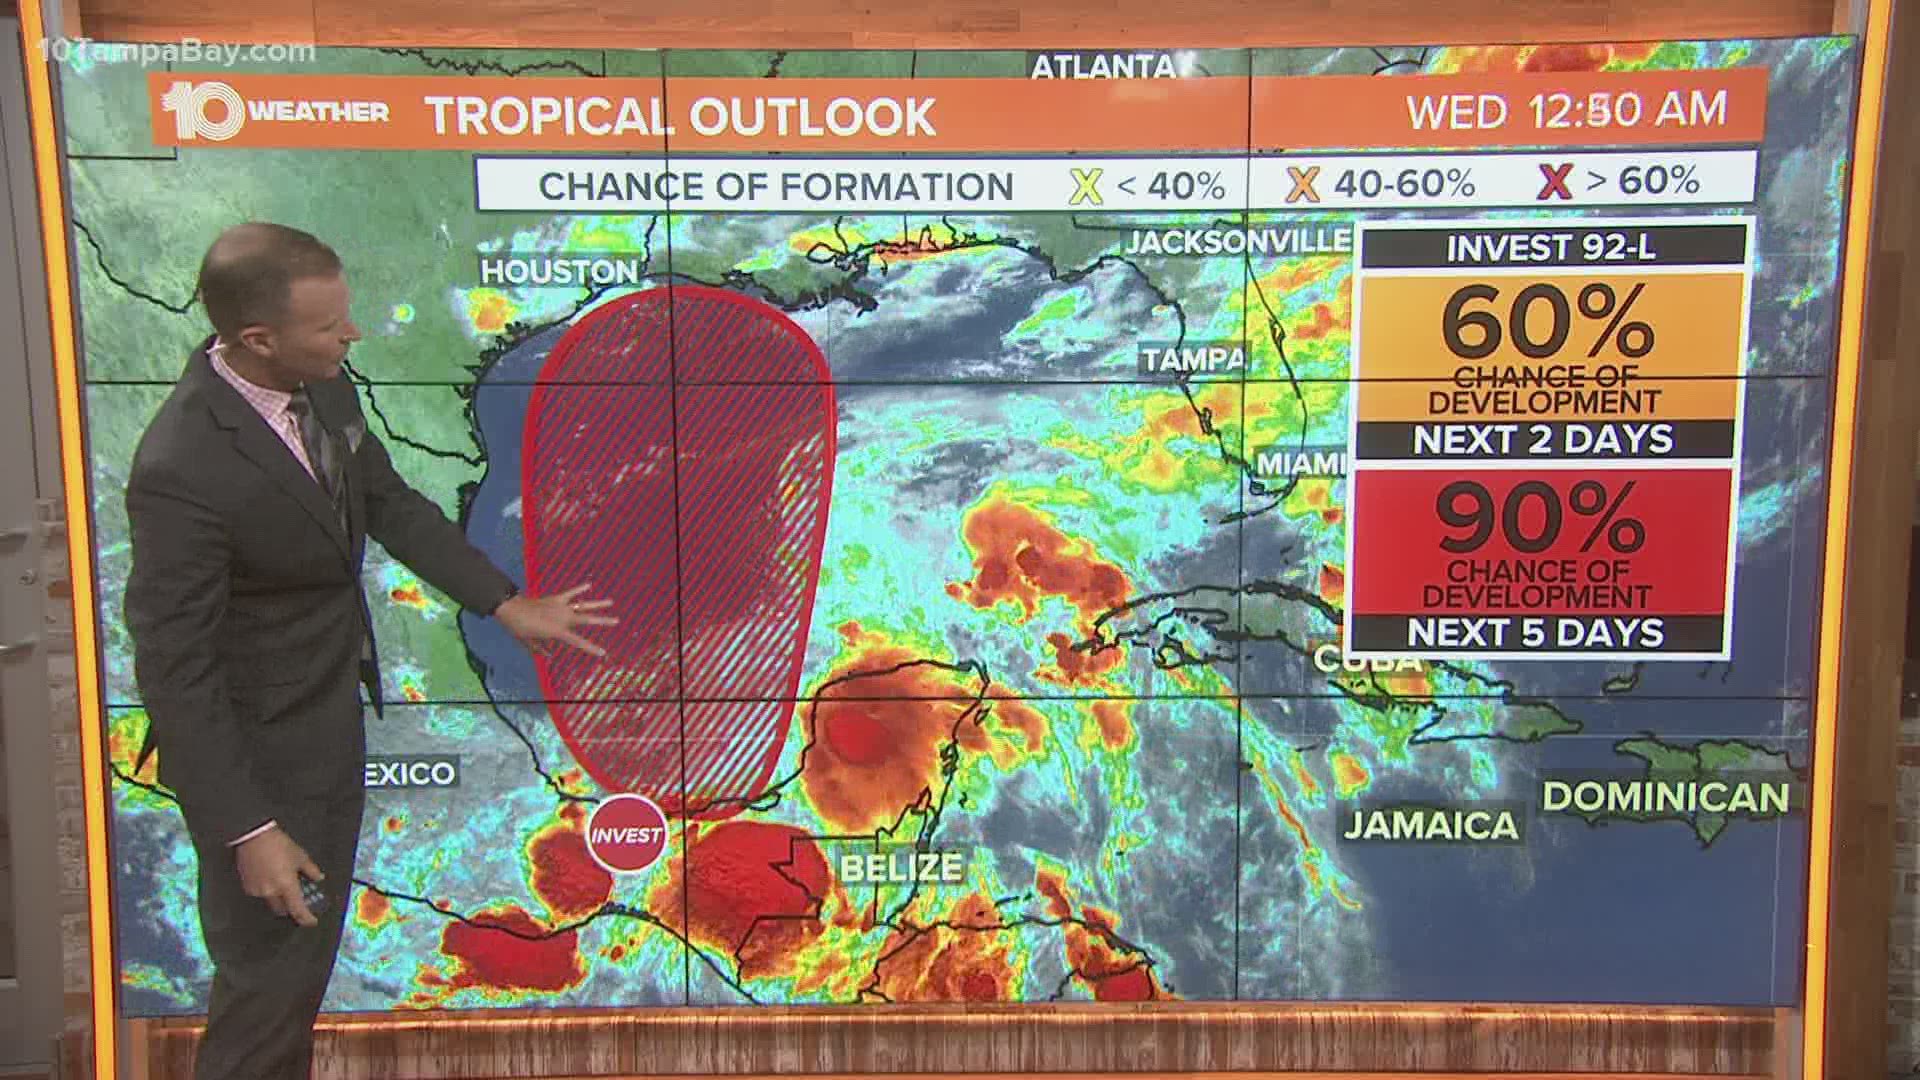 The disturbance, called Invest 92-L, could become Tropical Storm Claudette later this week.